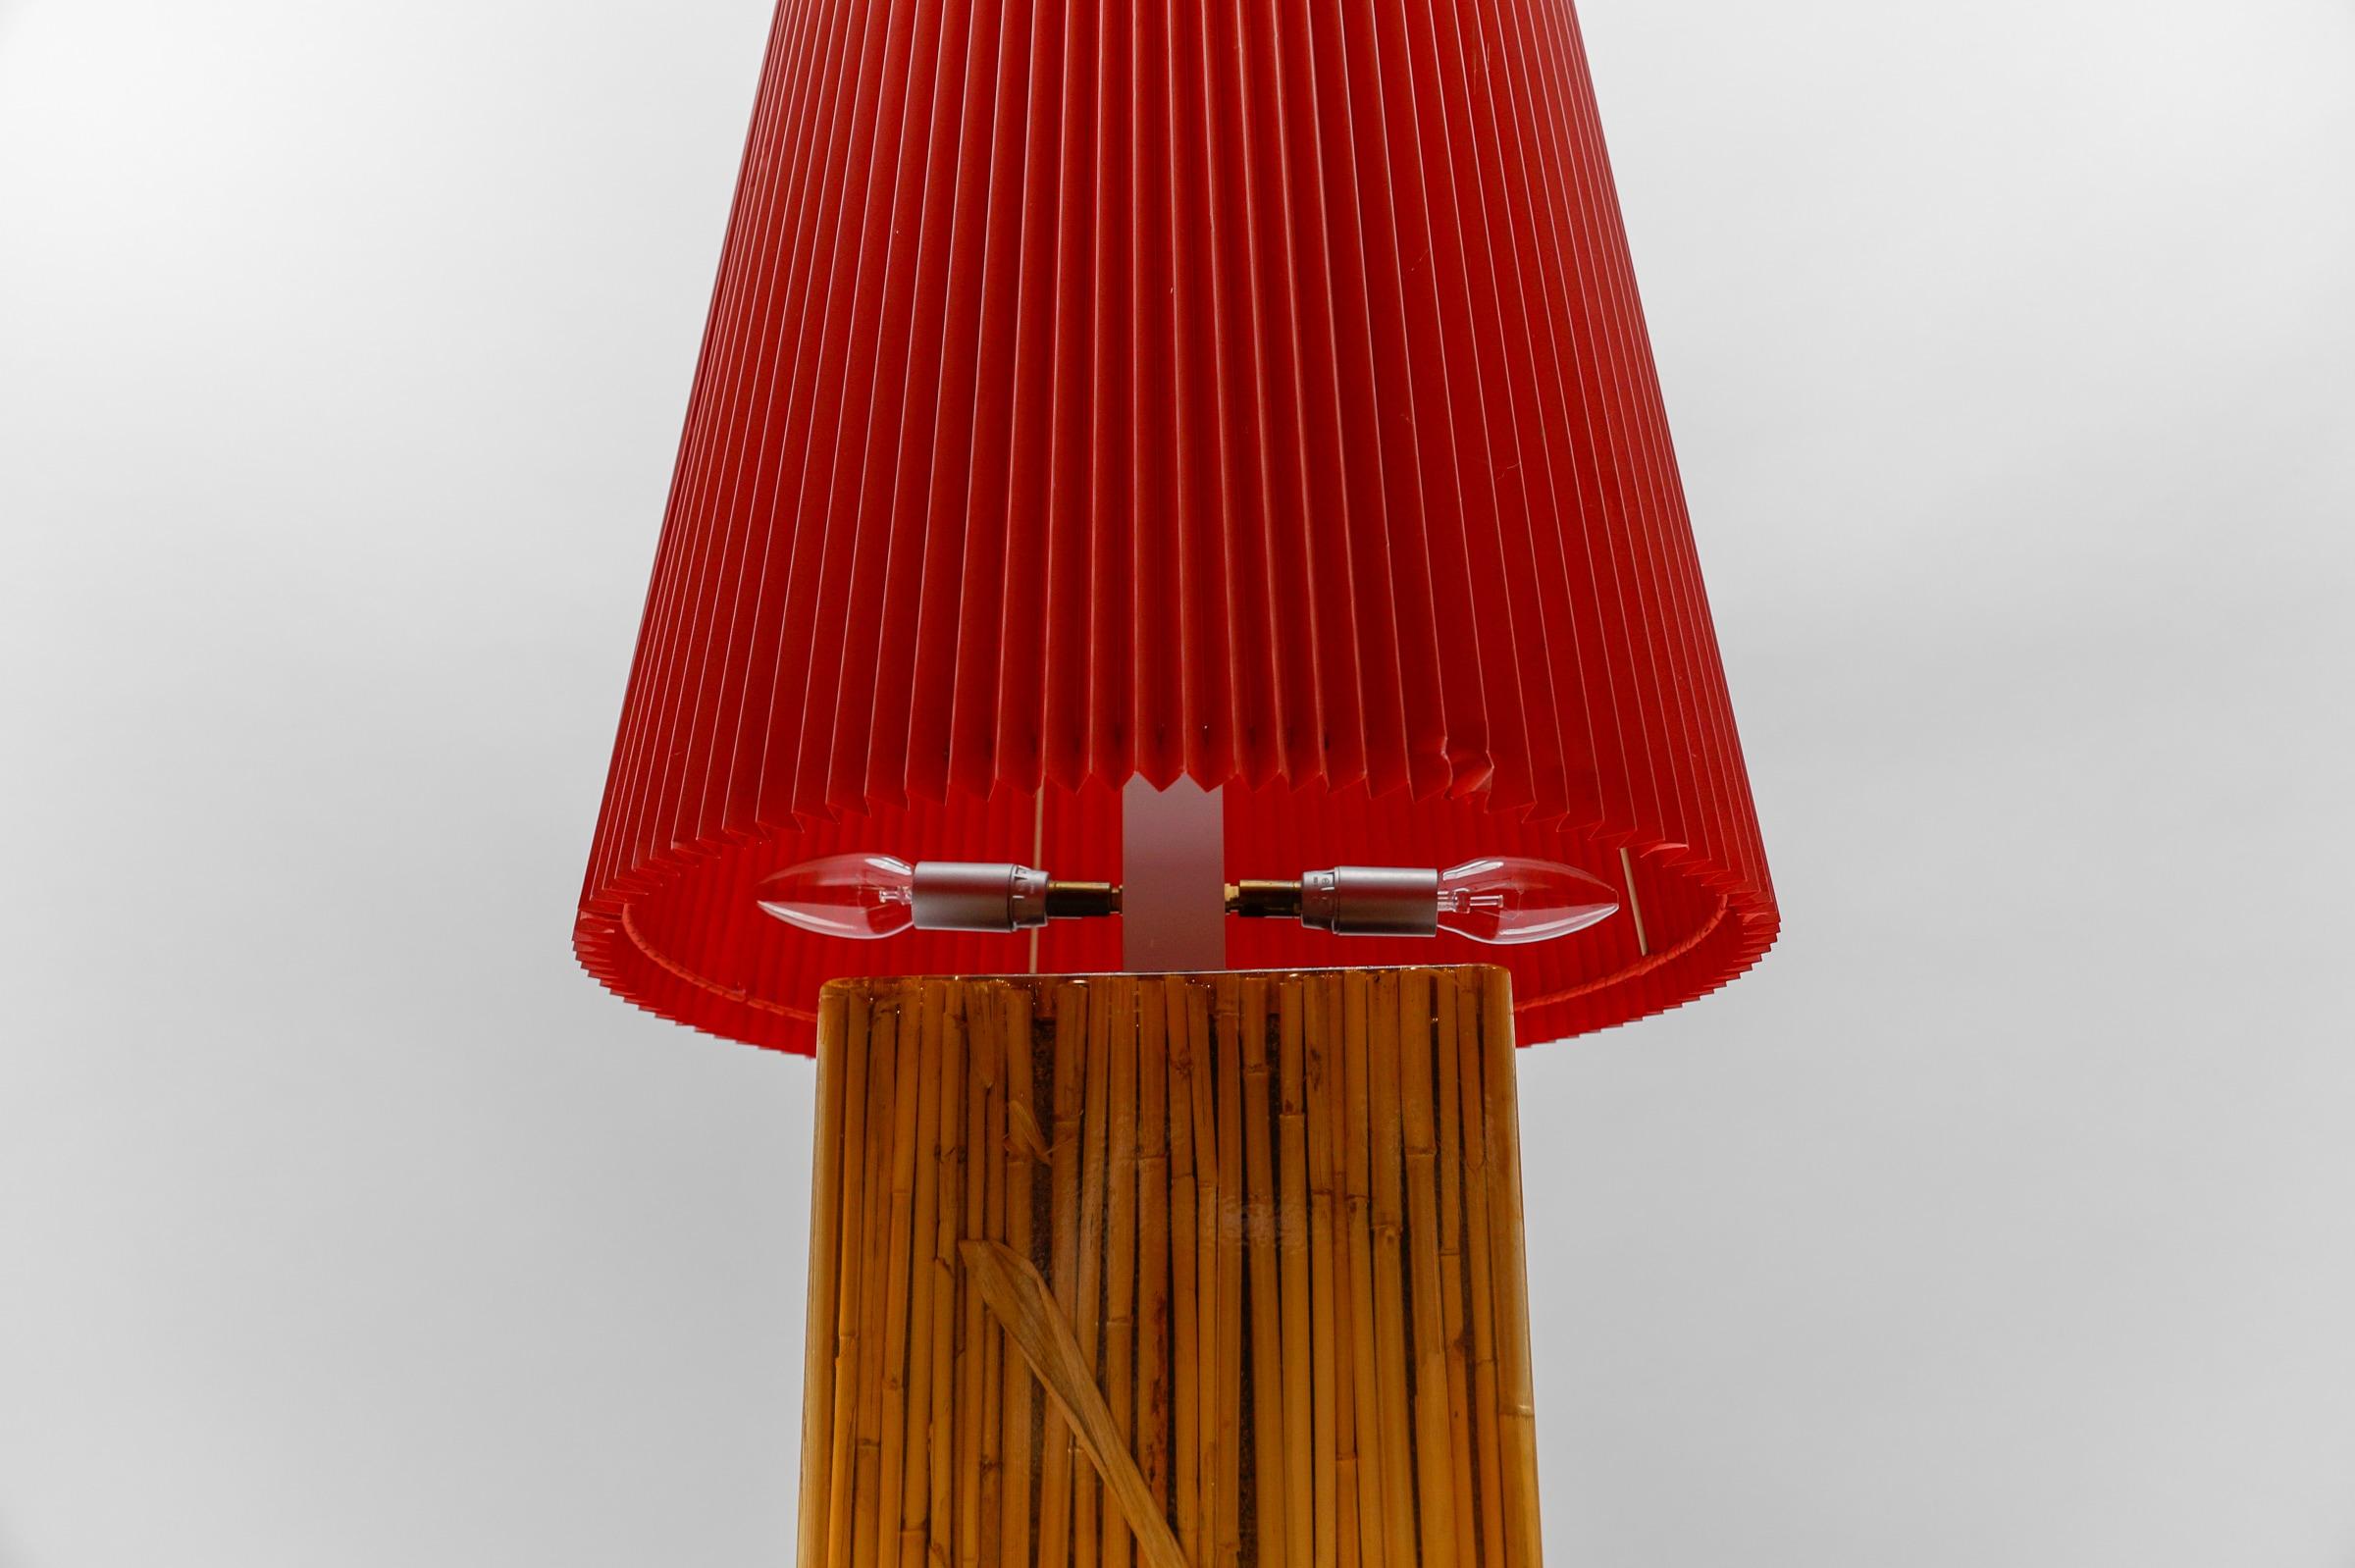 Large Riccardo Marzi Bamboo Resin Table Lamp, 1970s Italy In Good Condition For Sale In Nürnberg, Bayern